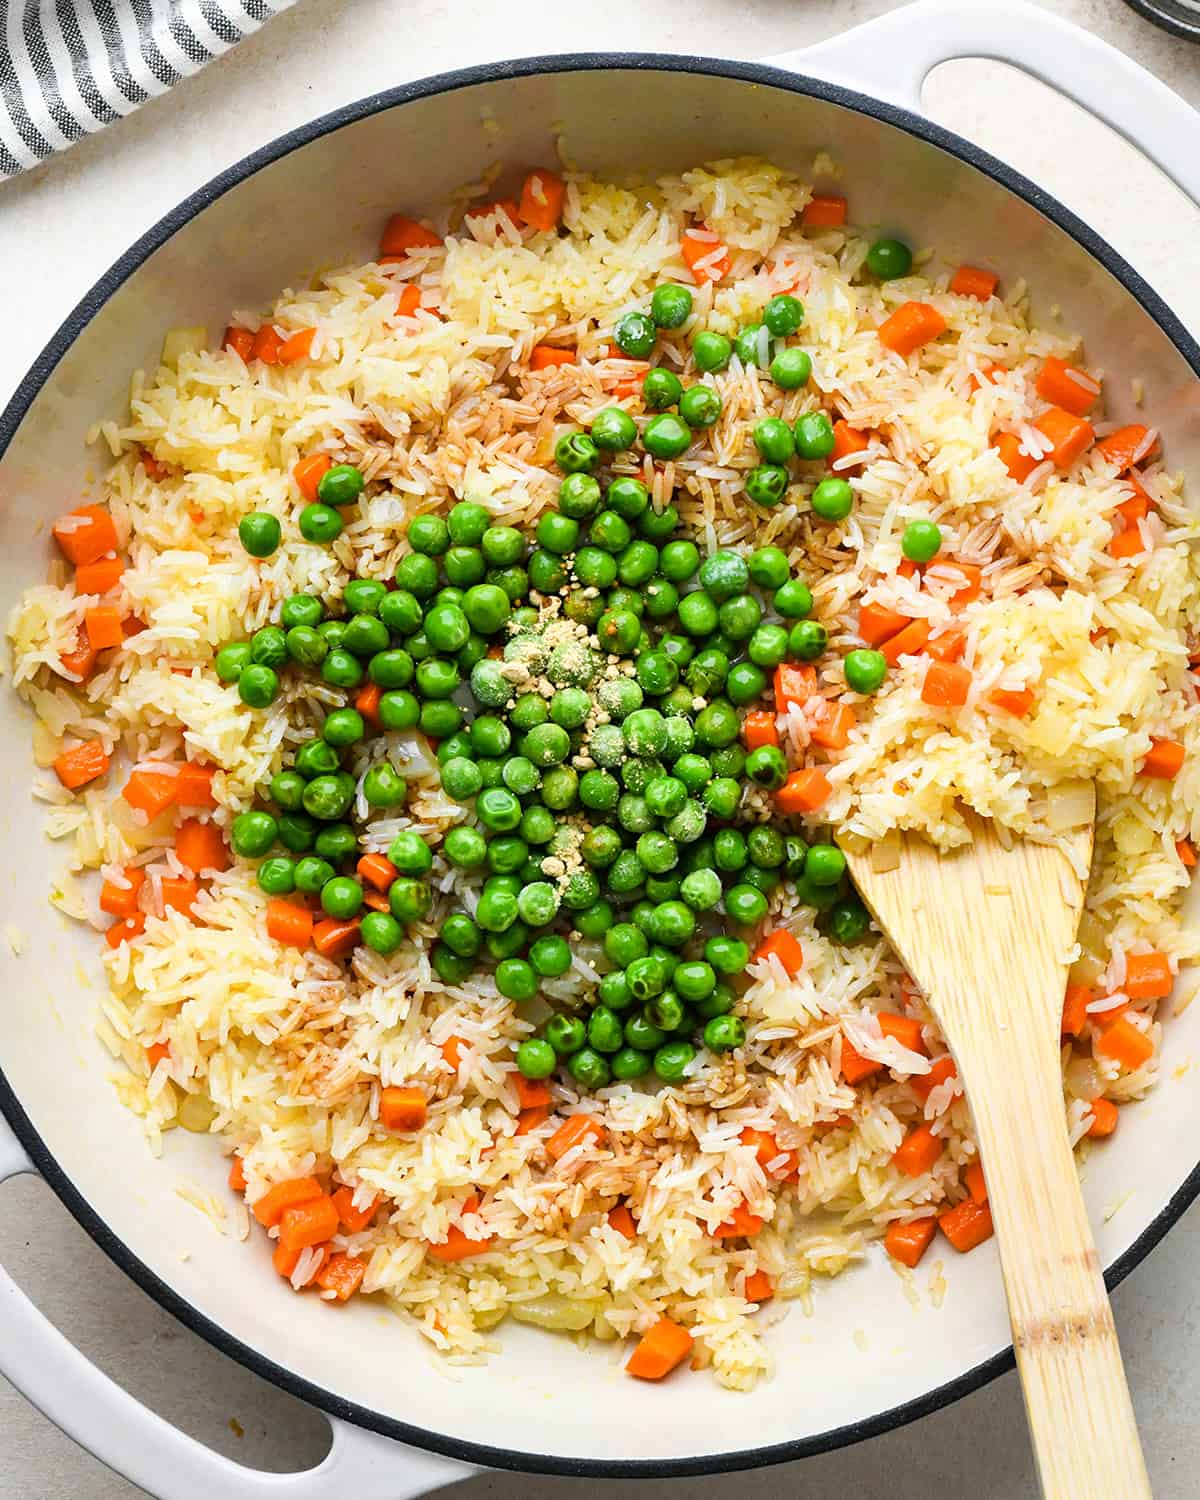 How to Make Fried Rice - adding peas, soy sauce and seasonings before mixing